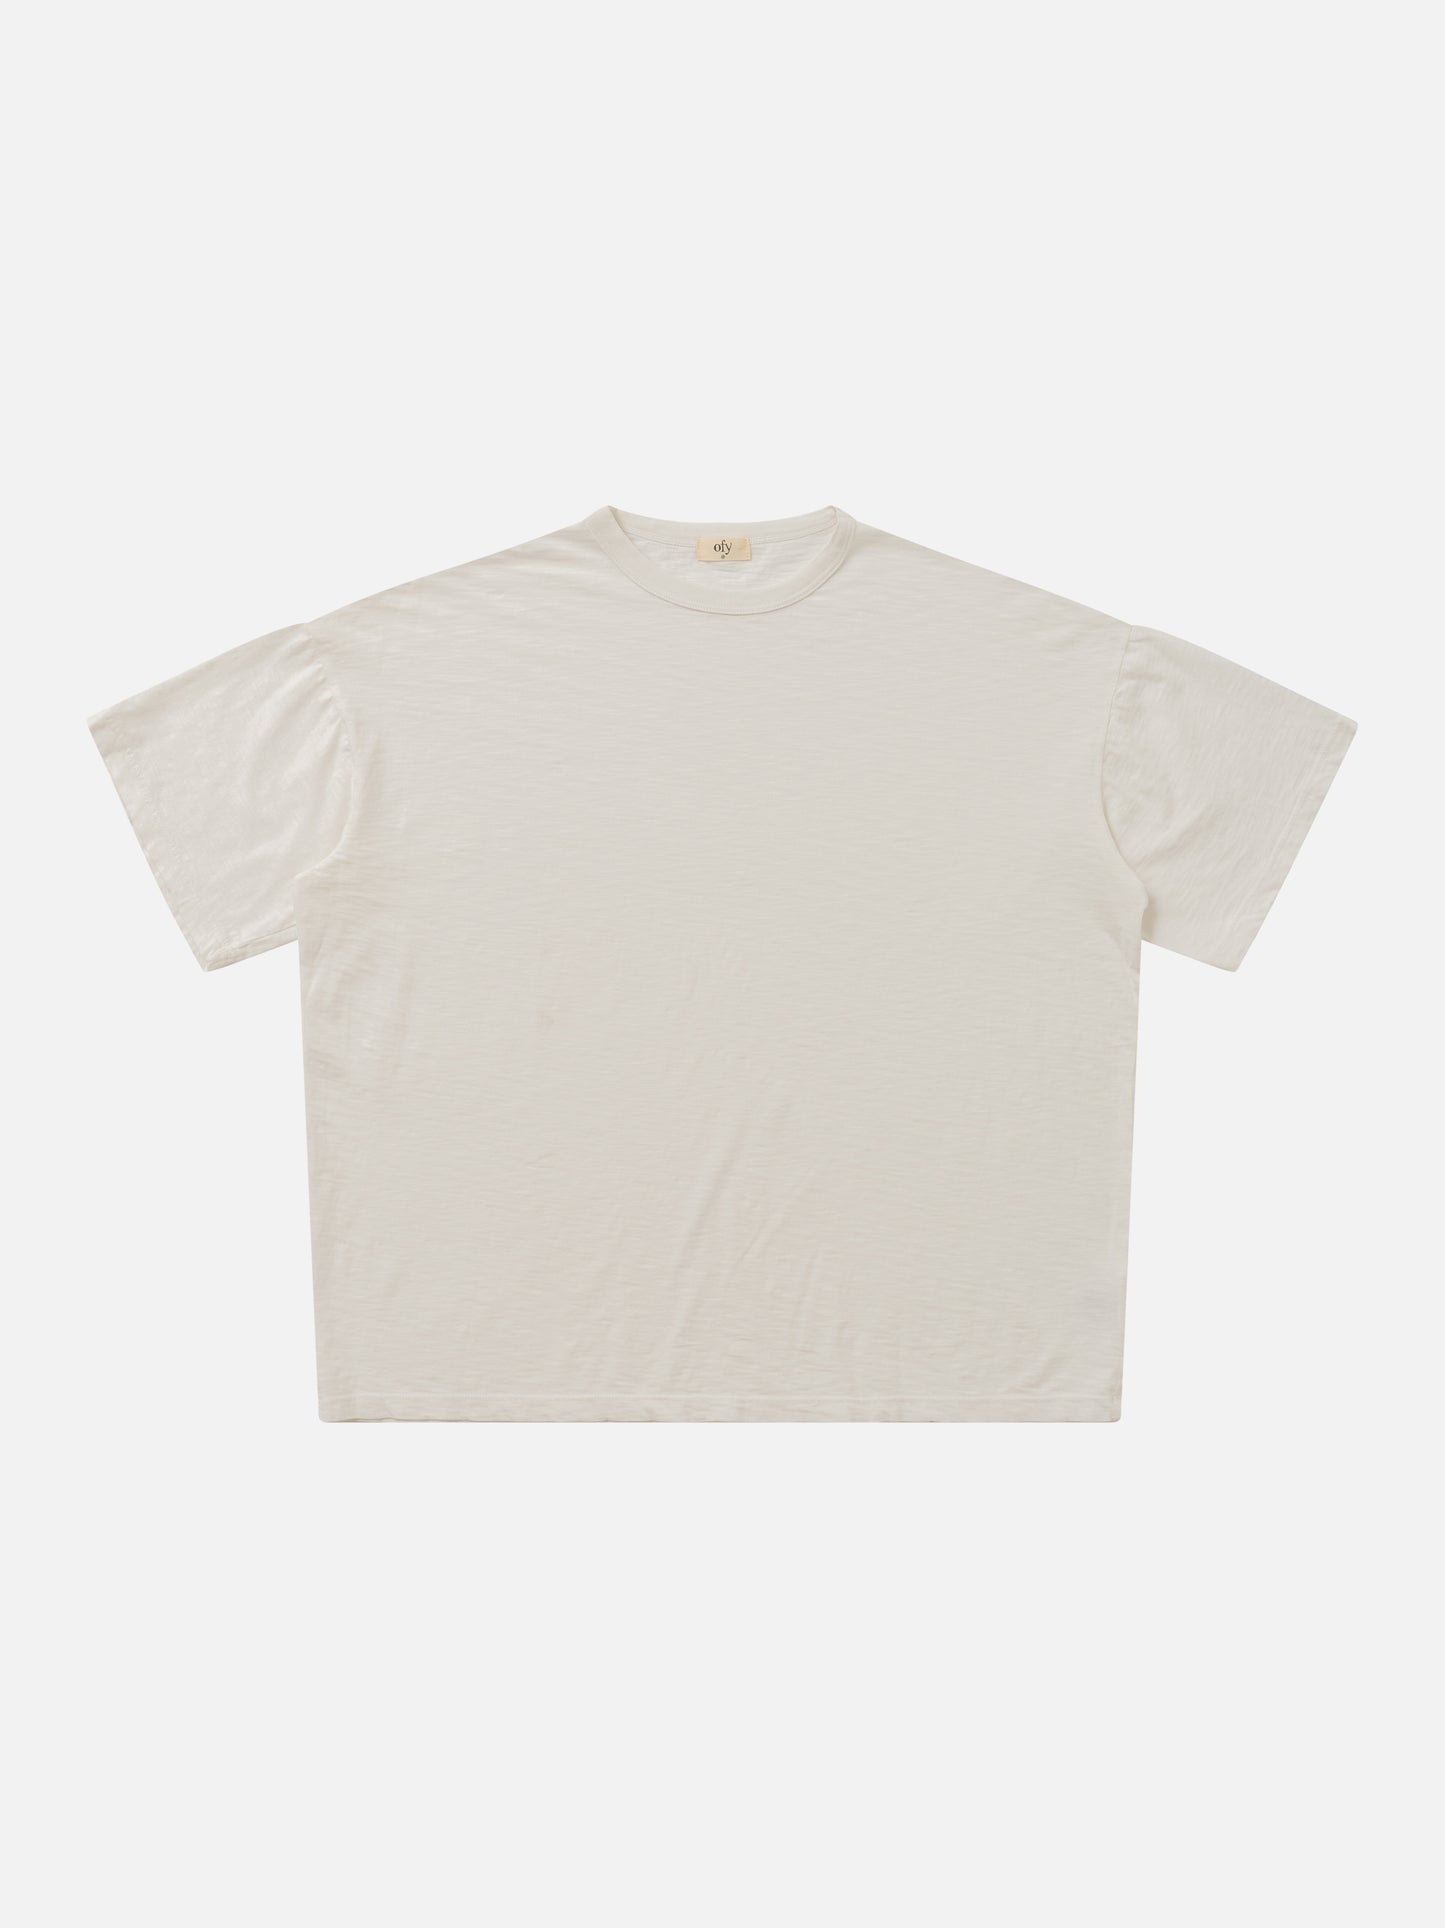 Cropped Tee - Lucent White